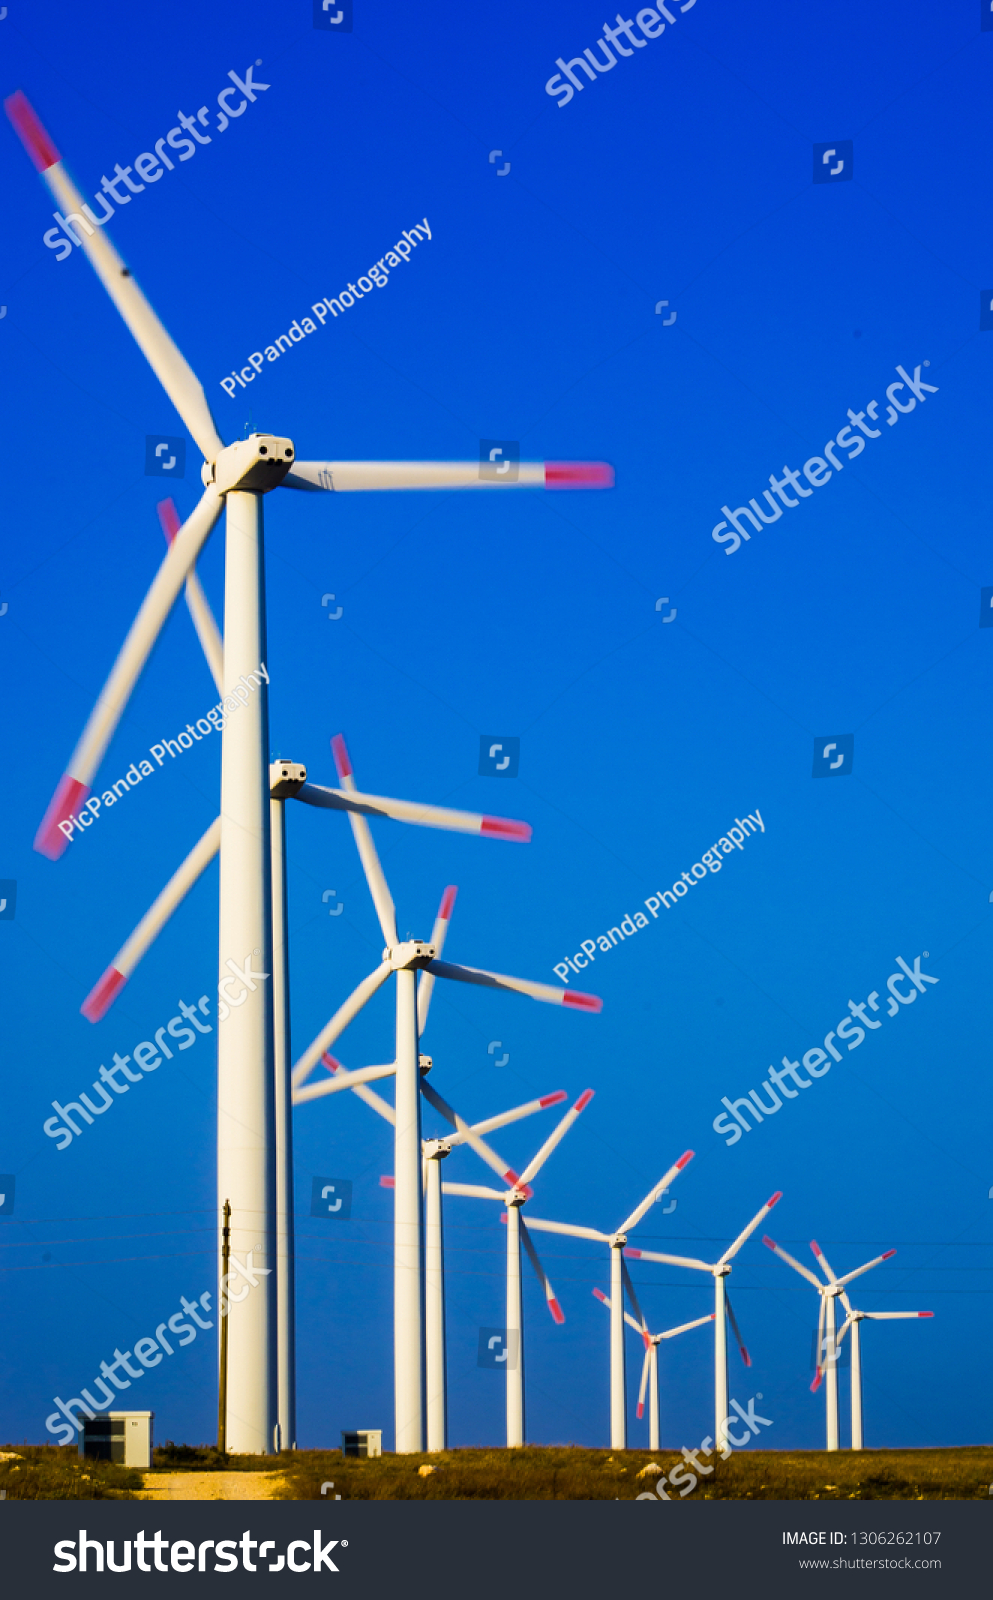 A row of rotating electric windmills. White wind turbines on a blue contrasty sky. #1306262107